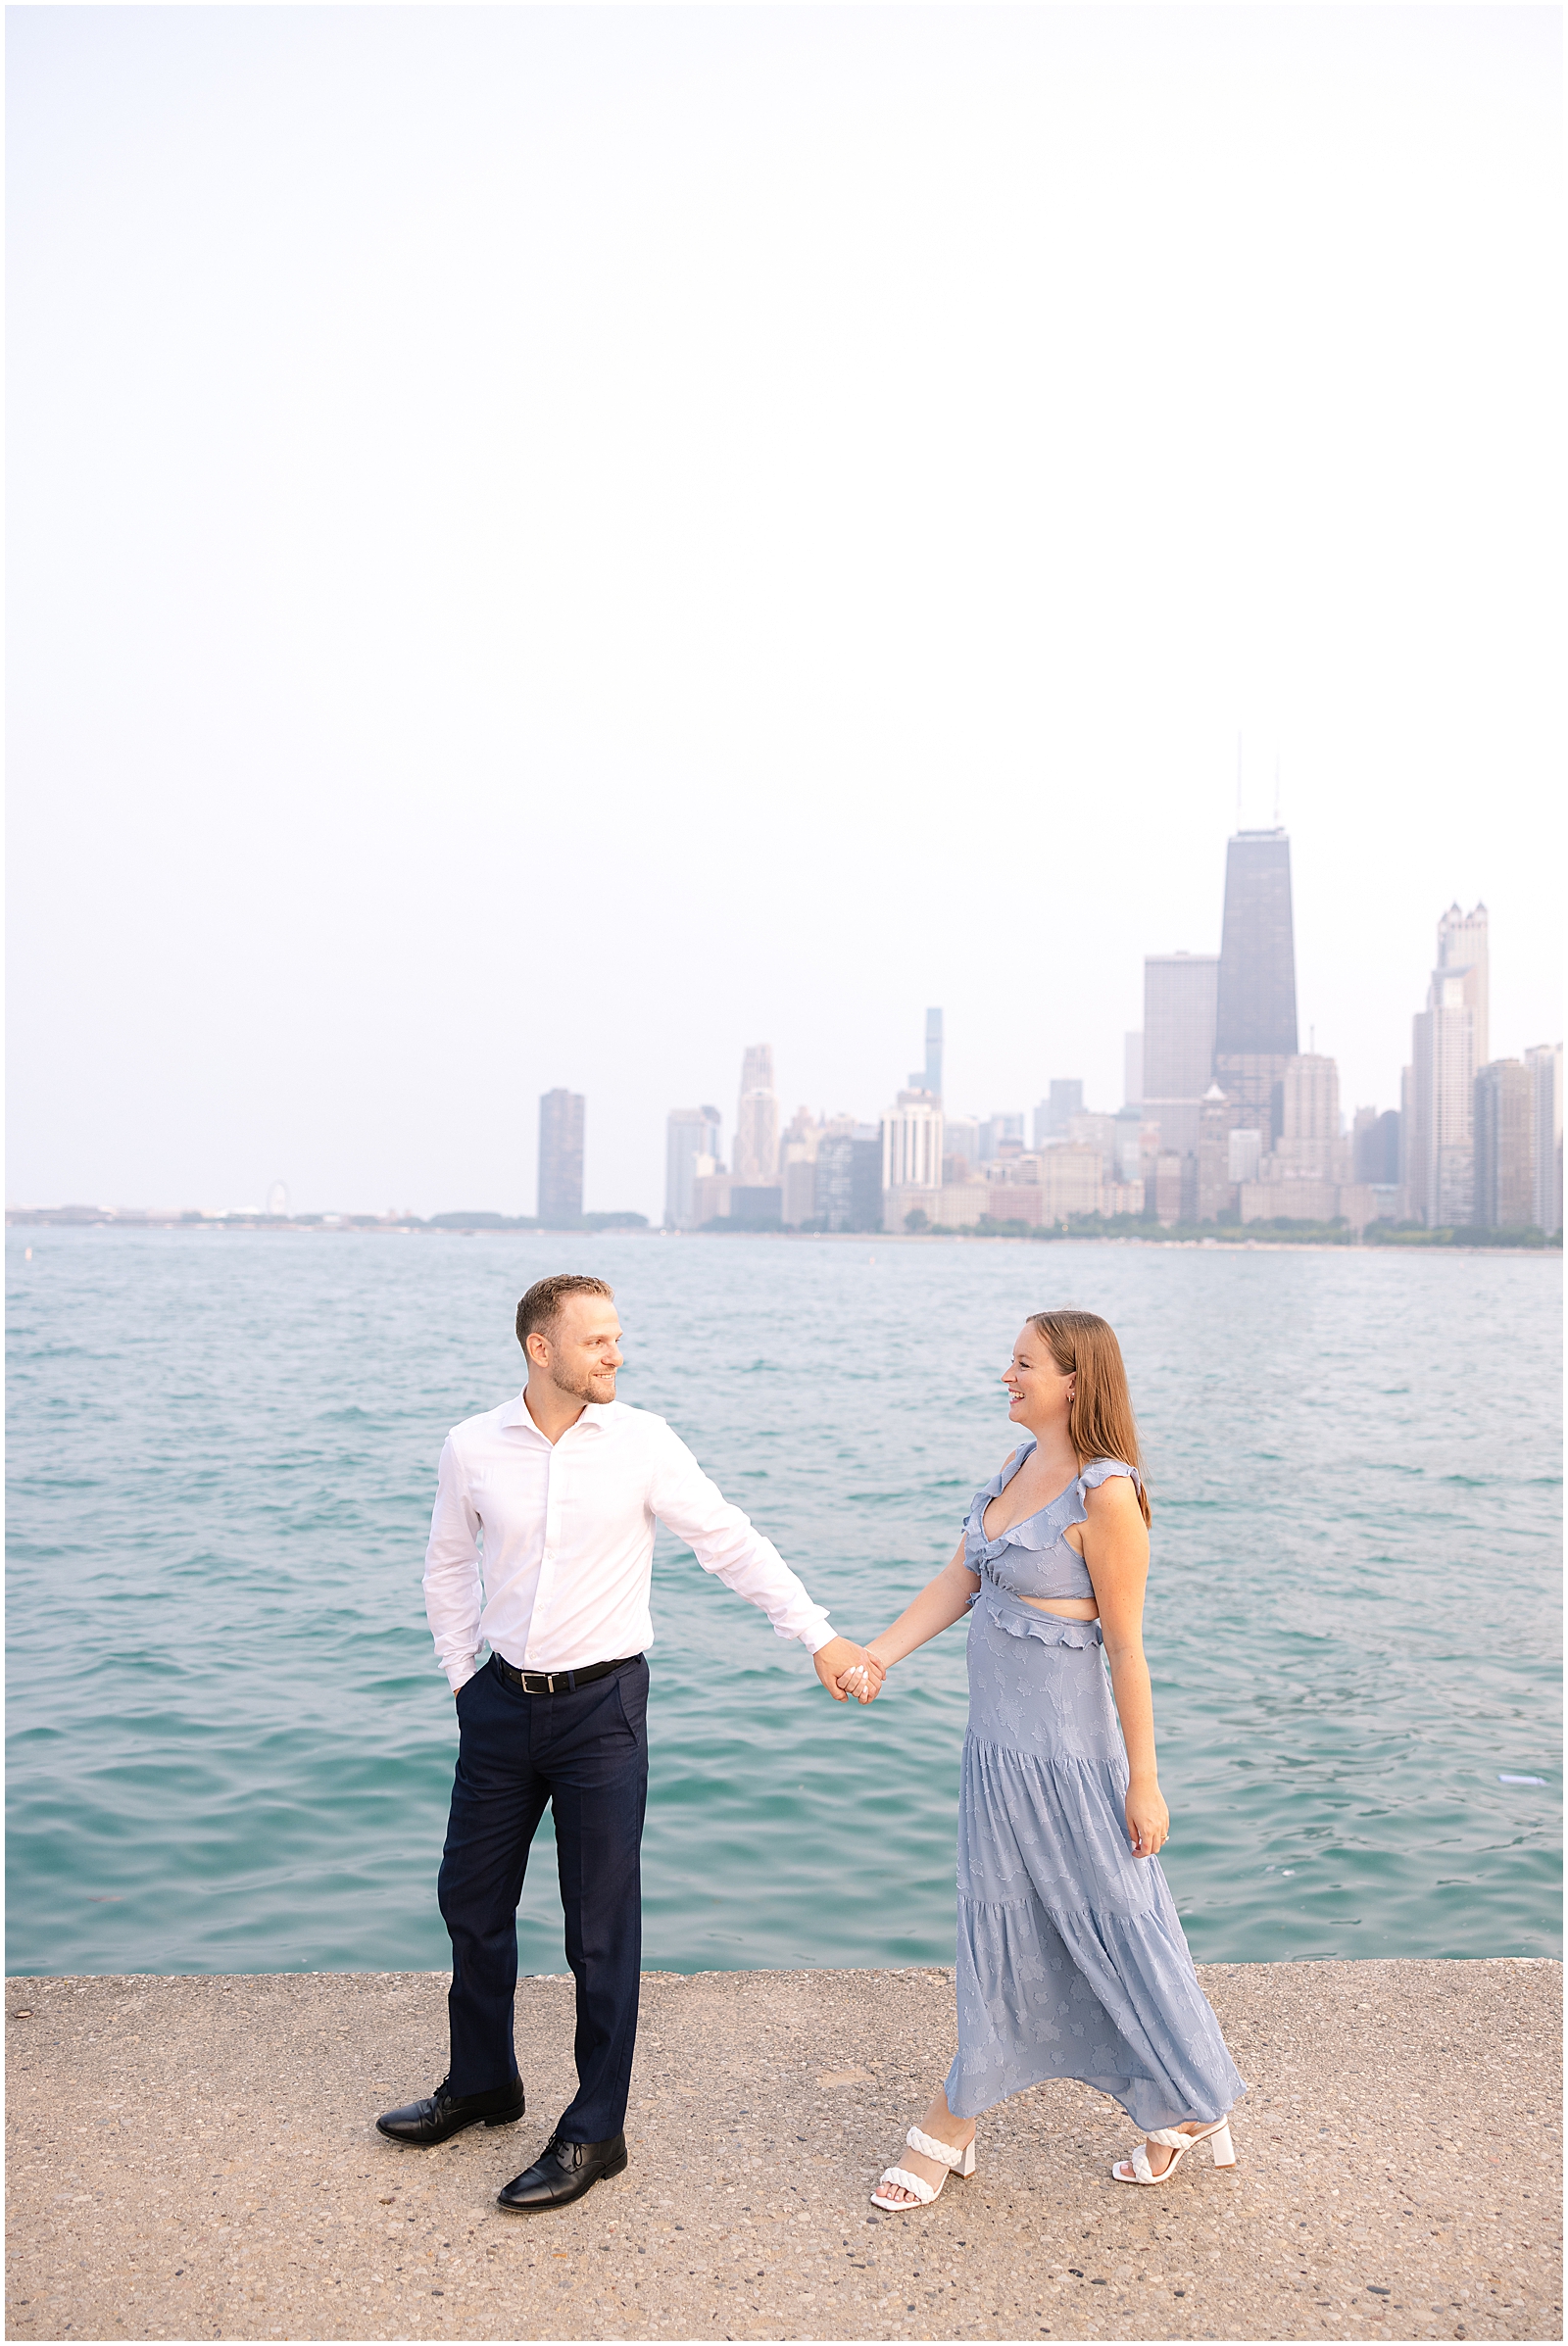 Sunset Engagement Session at North Ave Beach in Chicago